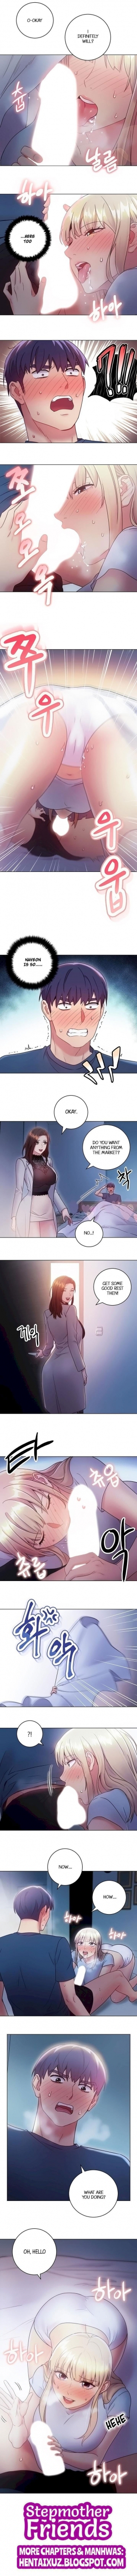  [Neck Pilllow] Stepmother Friends Ch.39/? [English] [Hentai Universe] NEW! 13/10/2020  - Page 233